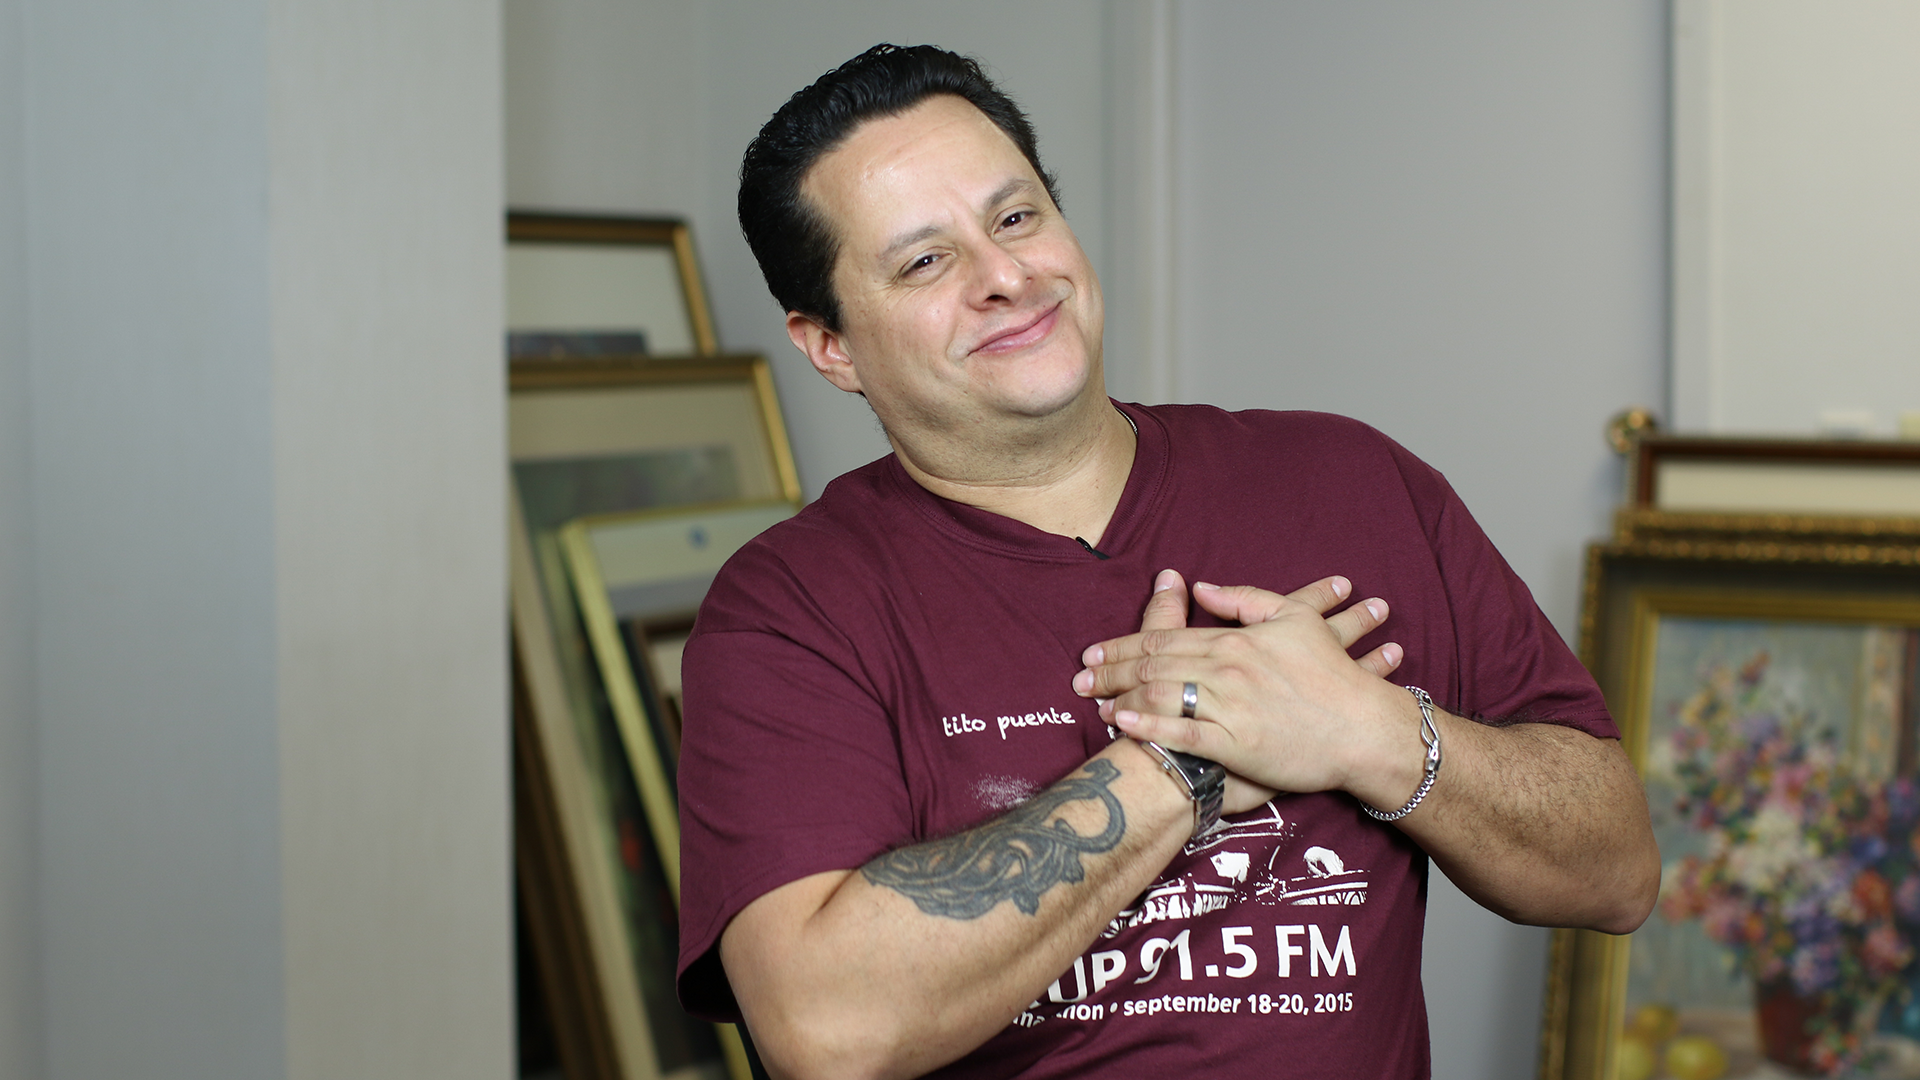 Tito Puente Jr.: You Have to Find Happiness in Being Grateful